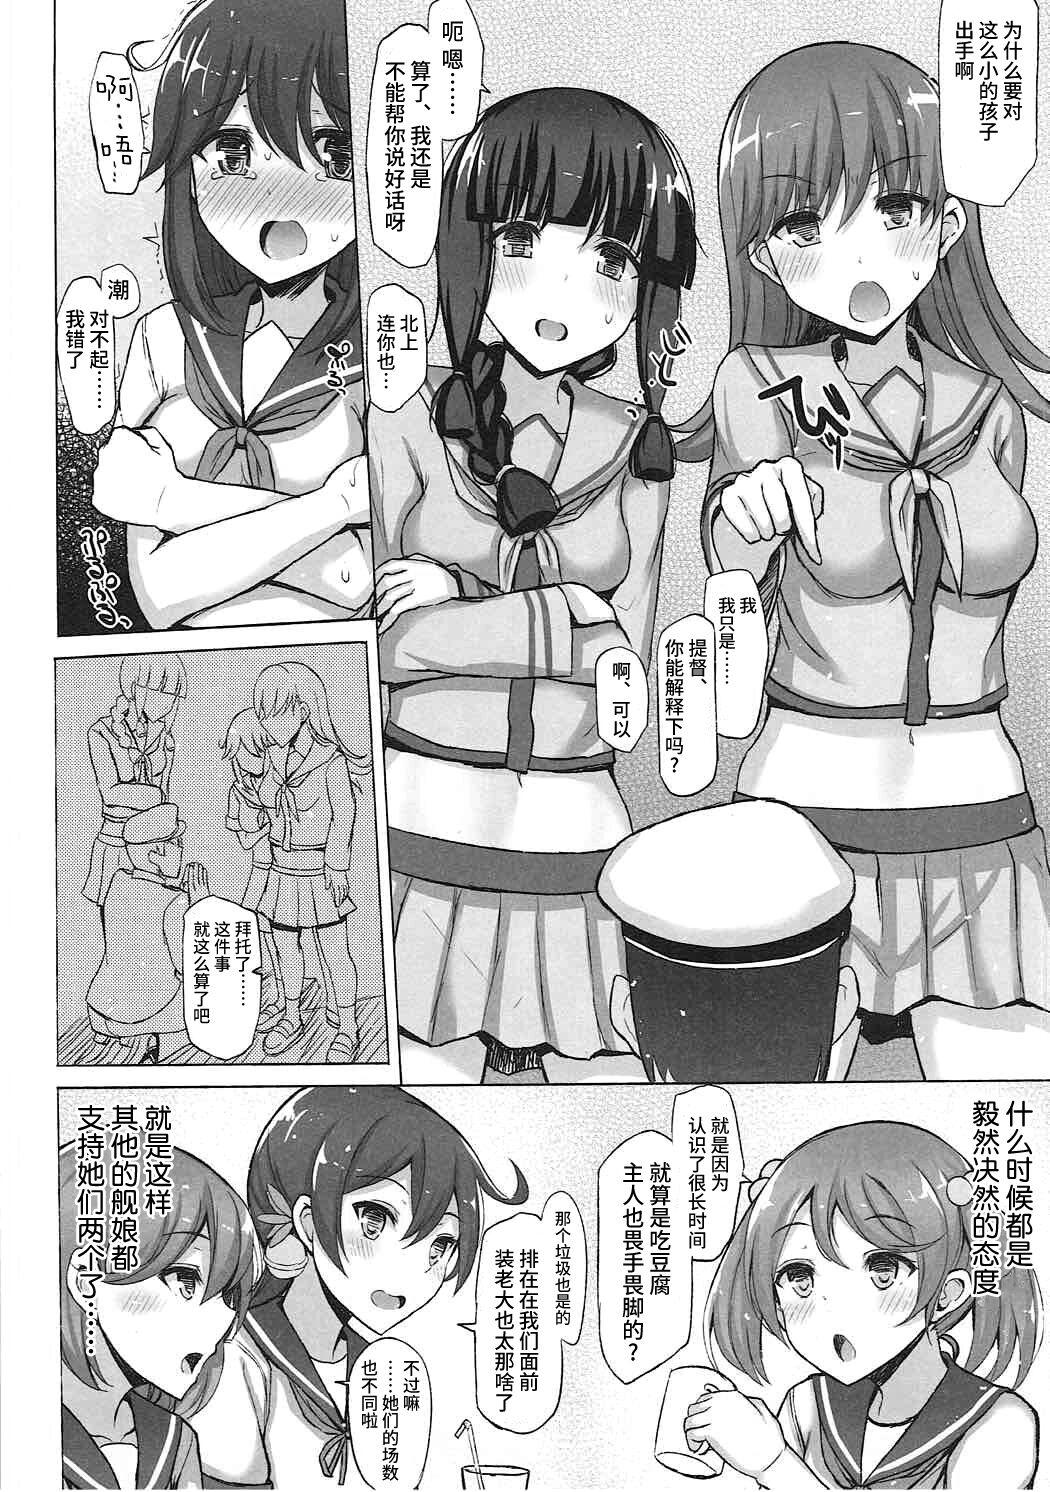 Bribe AS YOU ARE. - Kantai collection Amatoriale - Page 3